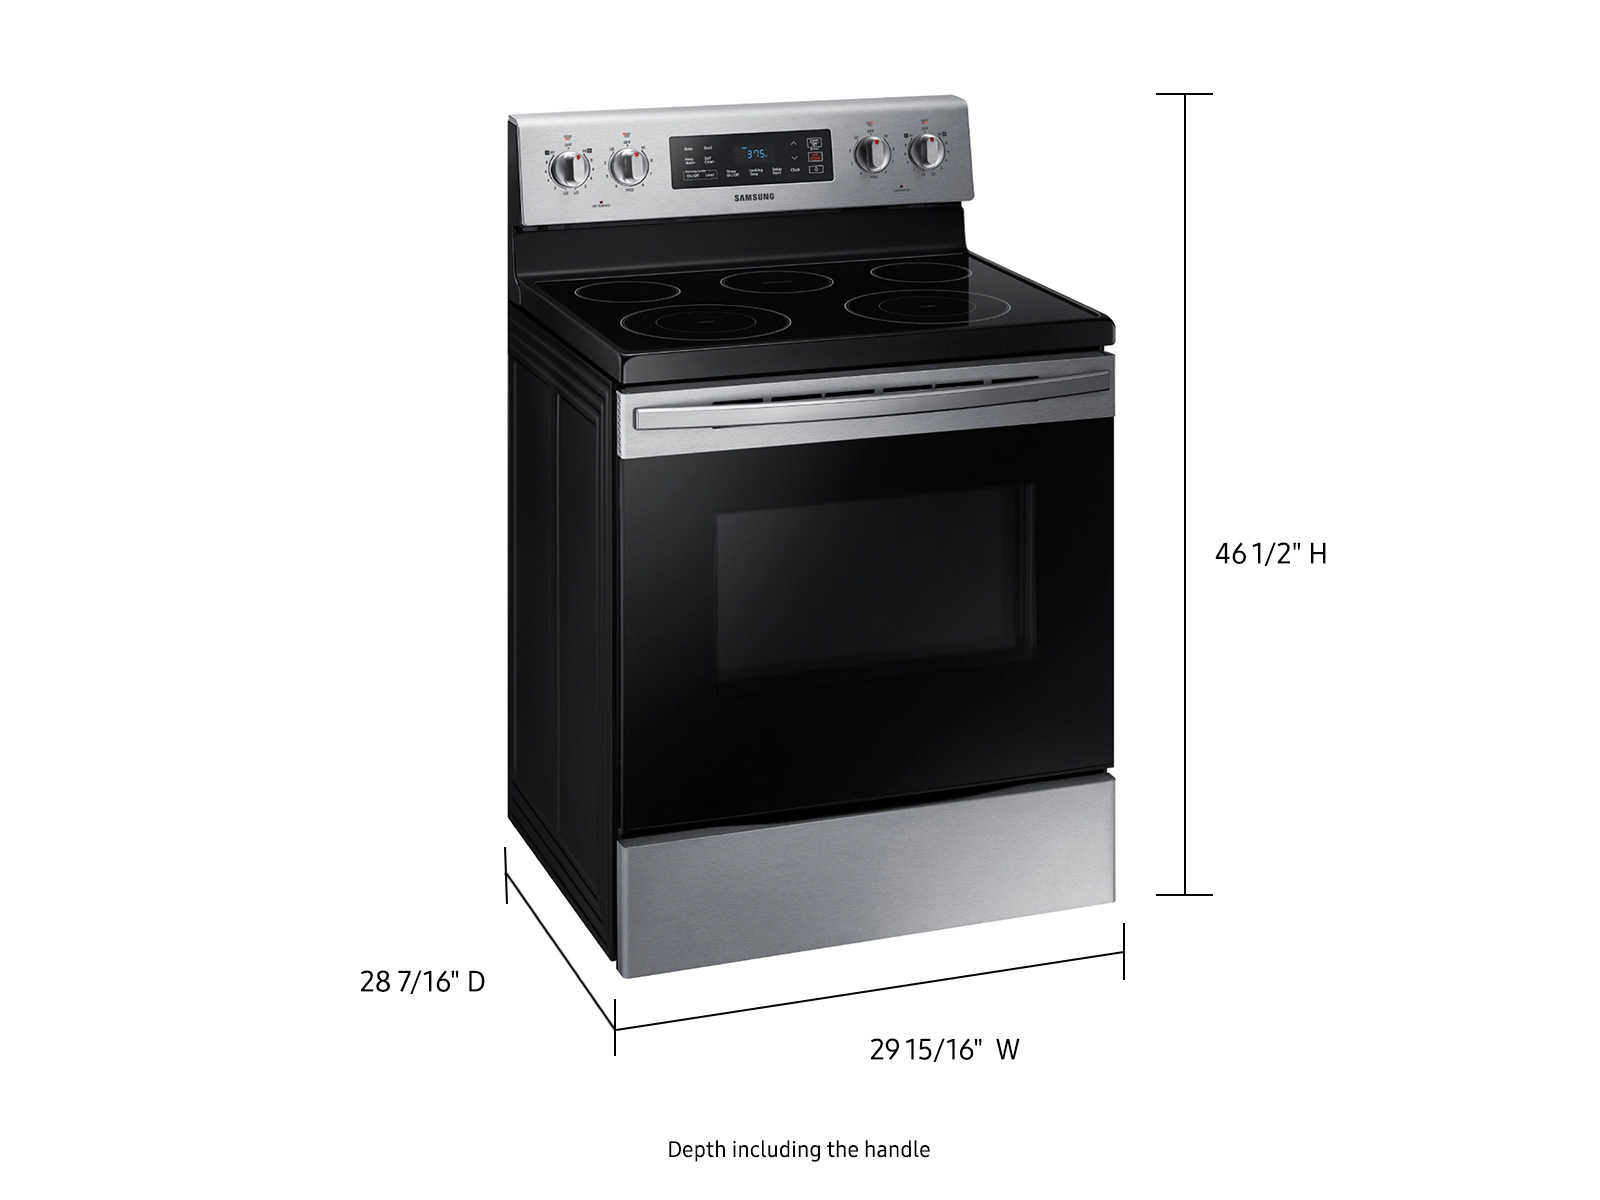 Electric Stove / Convection Oven (Samsung NE59M4320SS) Unbox, Video  Instructions & UNBIASED REVIEW 